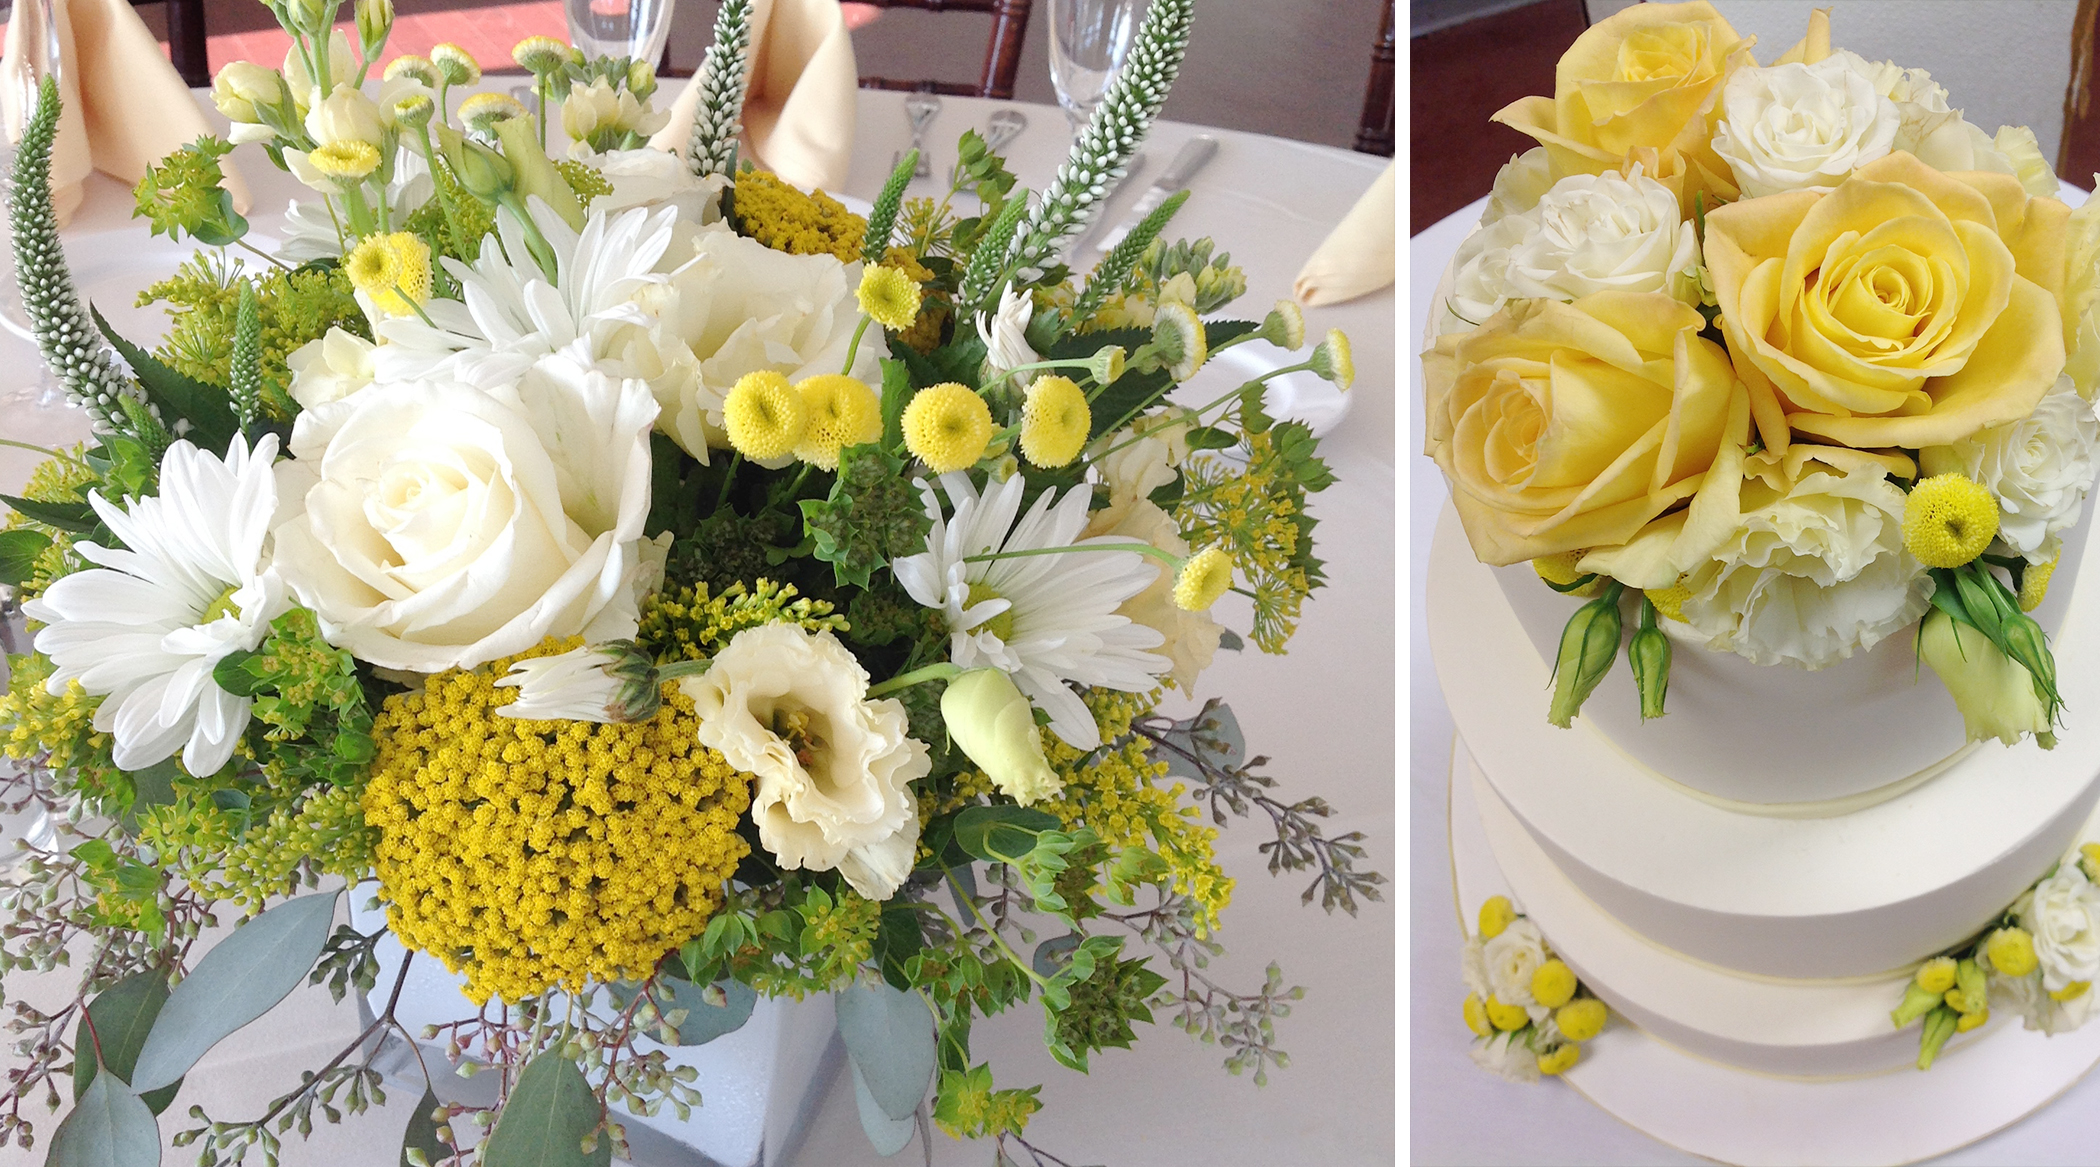 Palmer's Weddings & Events - Catering, Flowers, Cakes, Decor and more!